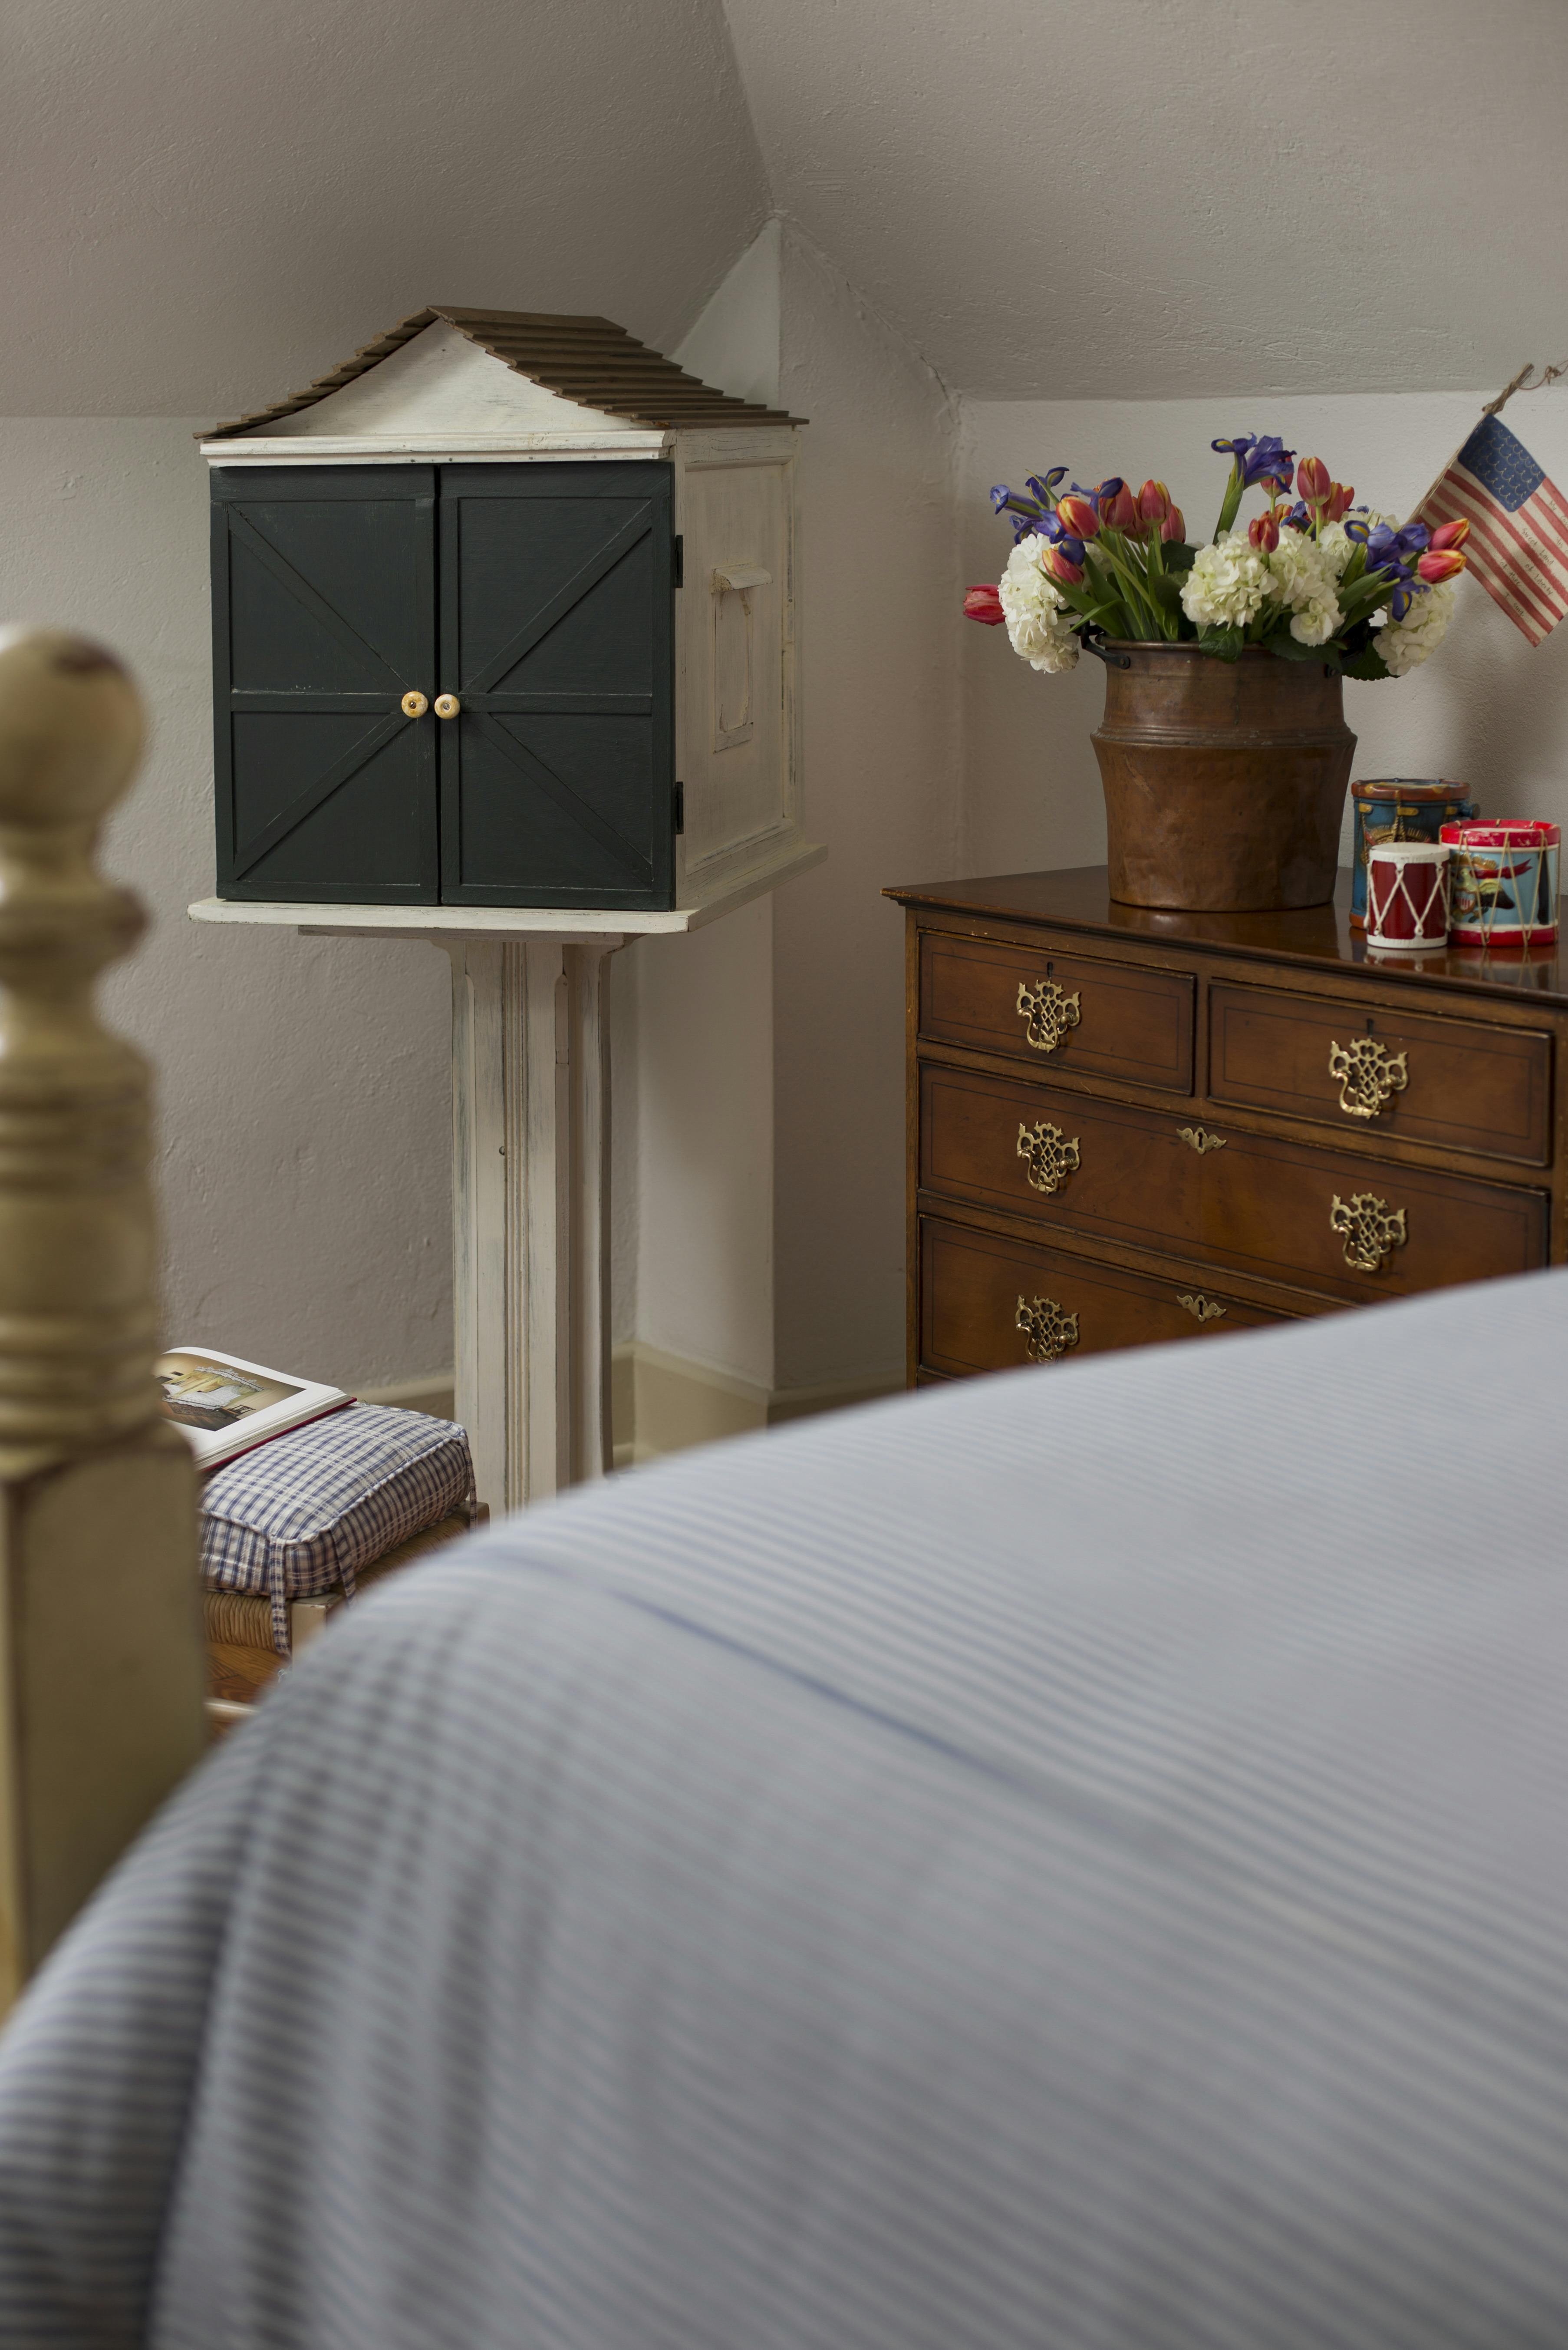 Bureau near foot of bed with red white and blue flower arrangement